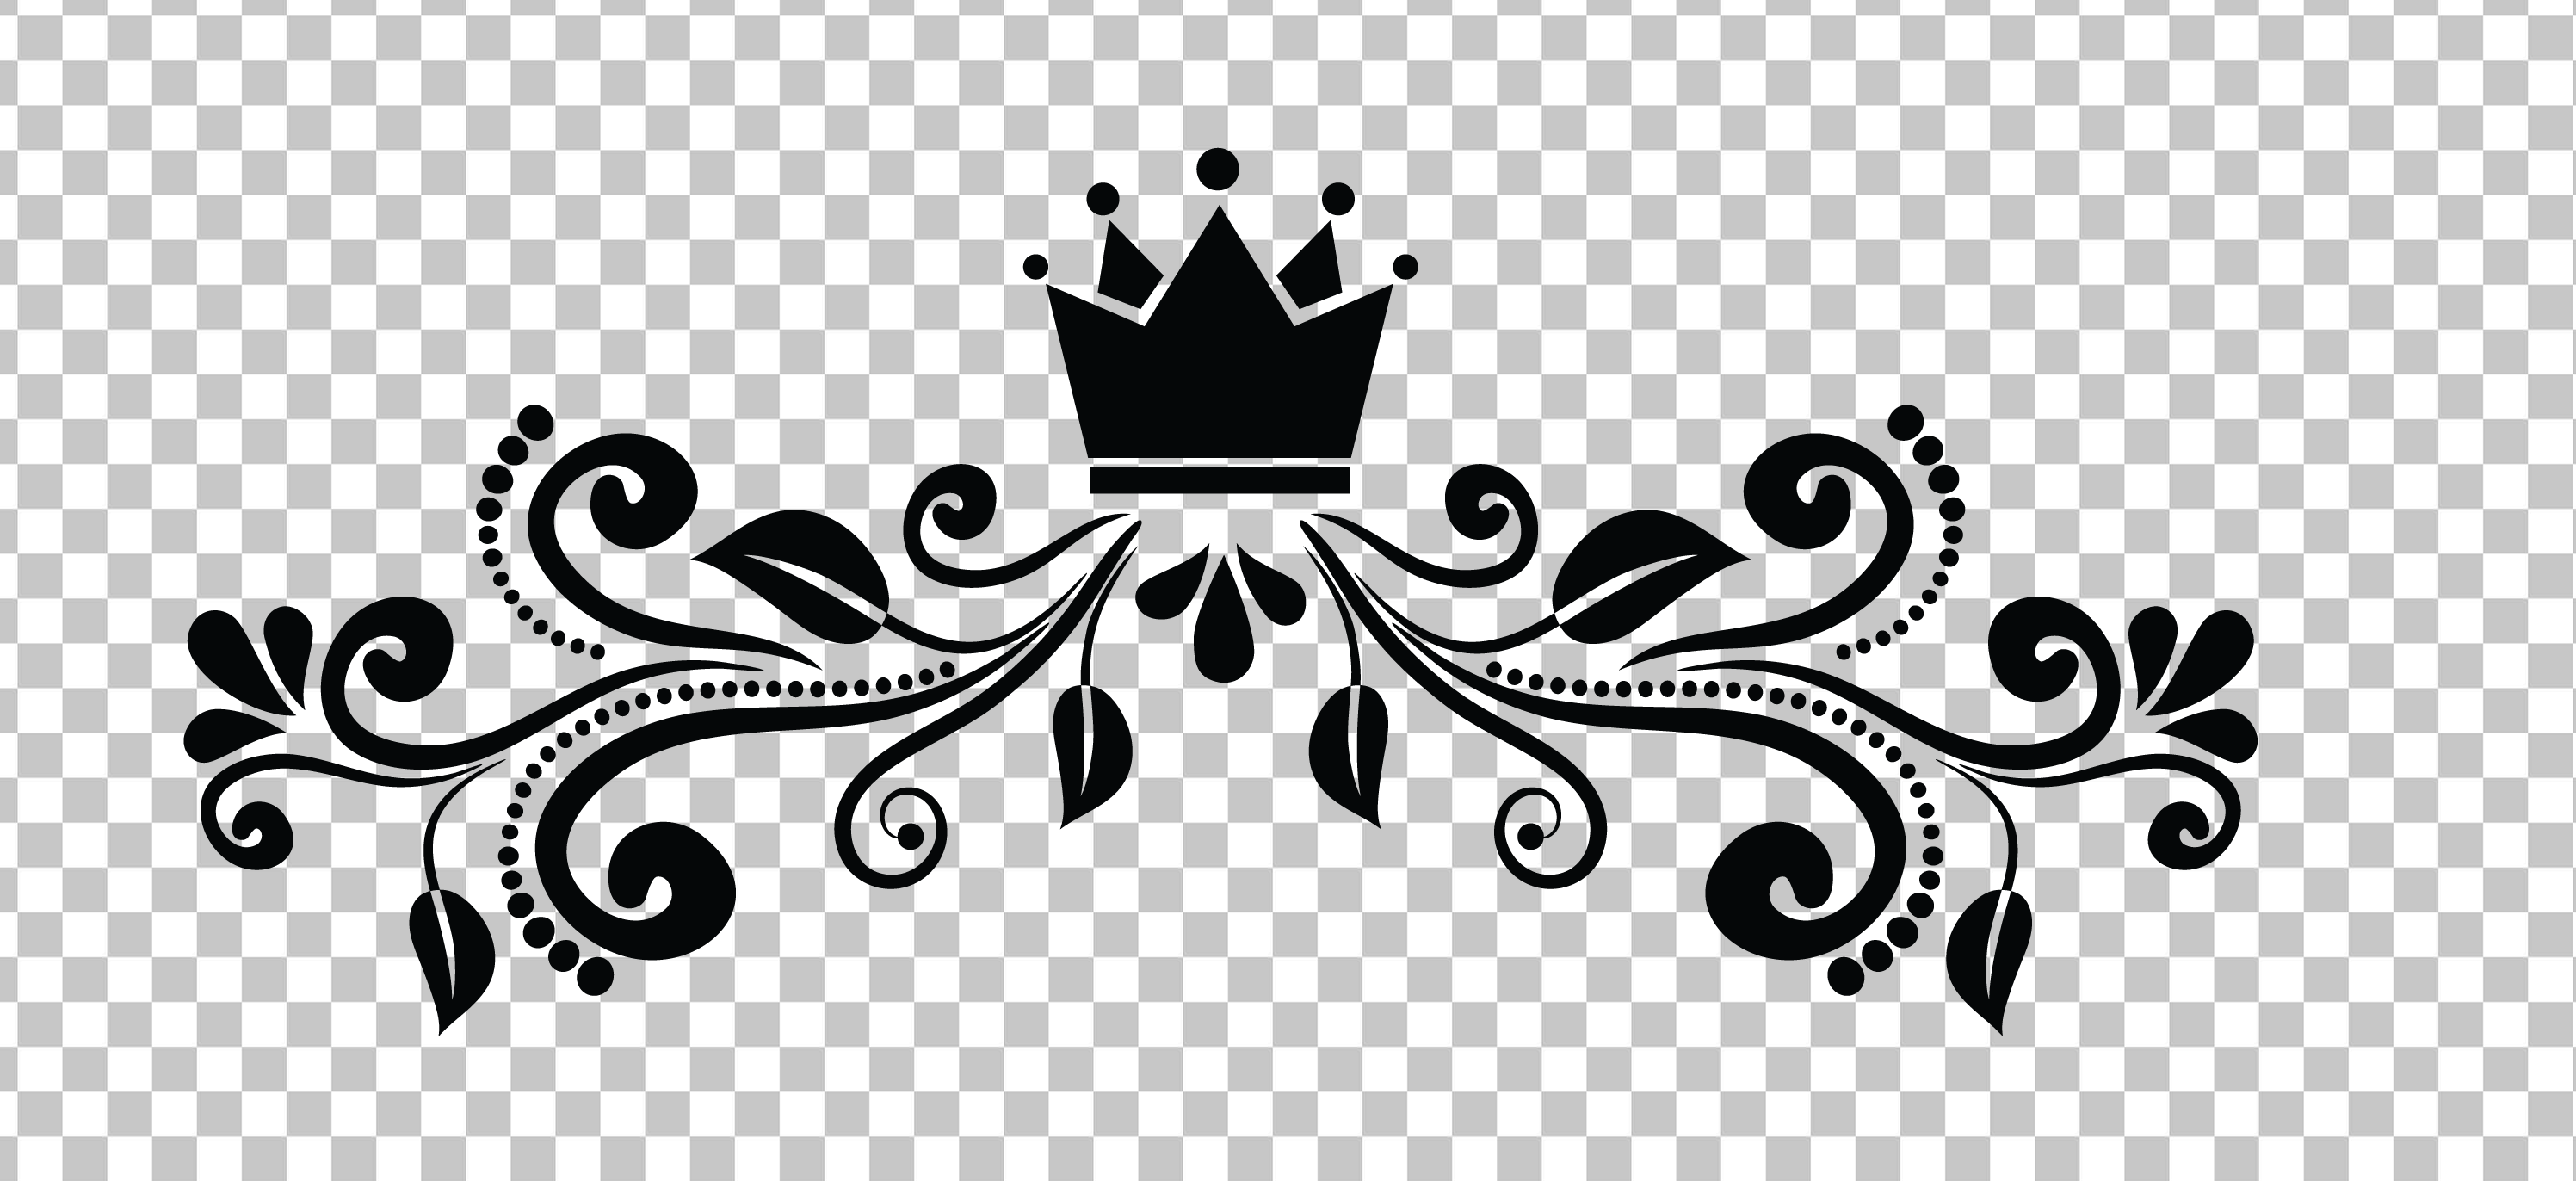 Black Crown and Leaves Page decor PNG Image